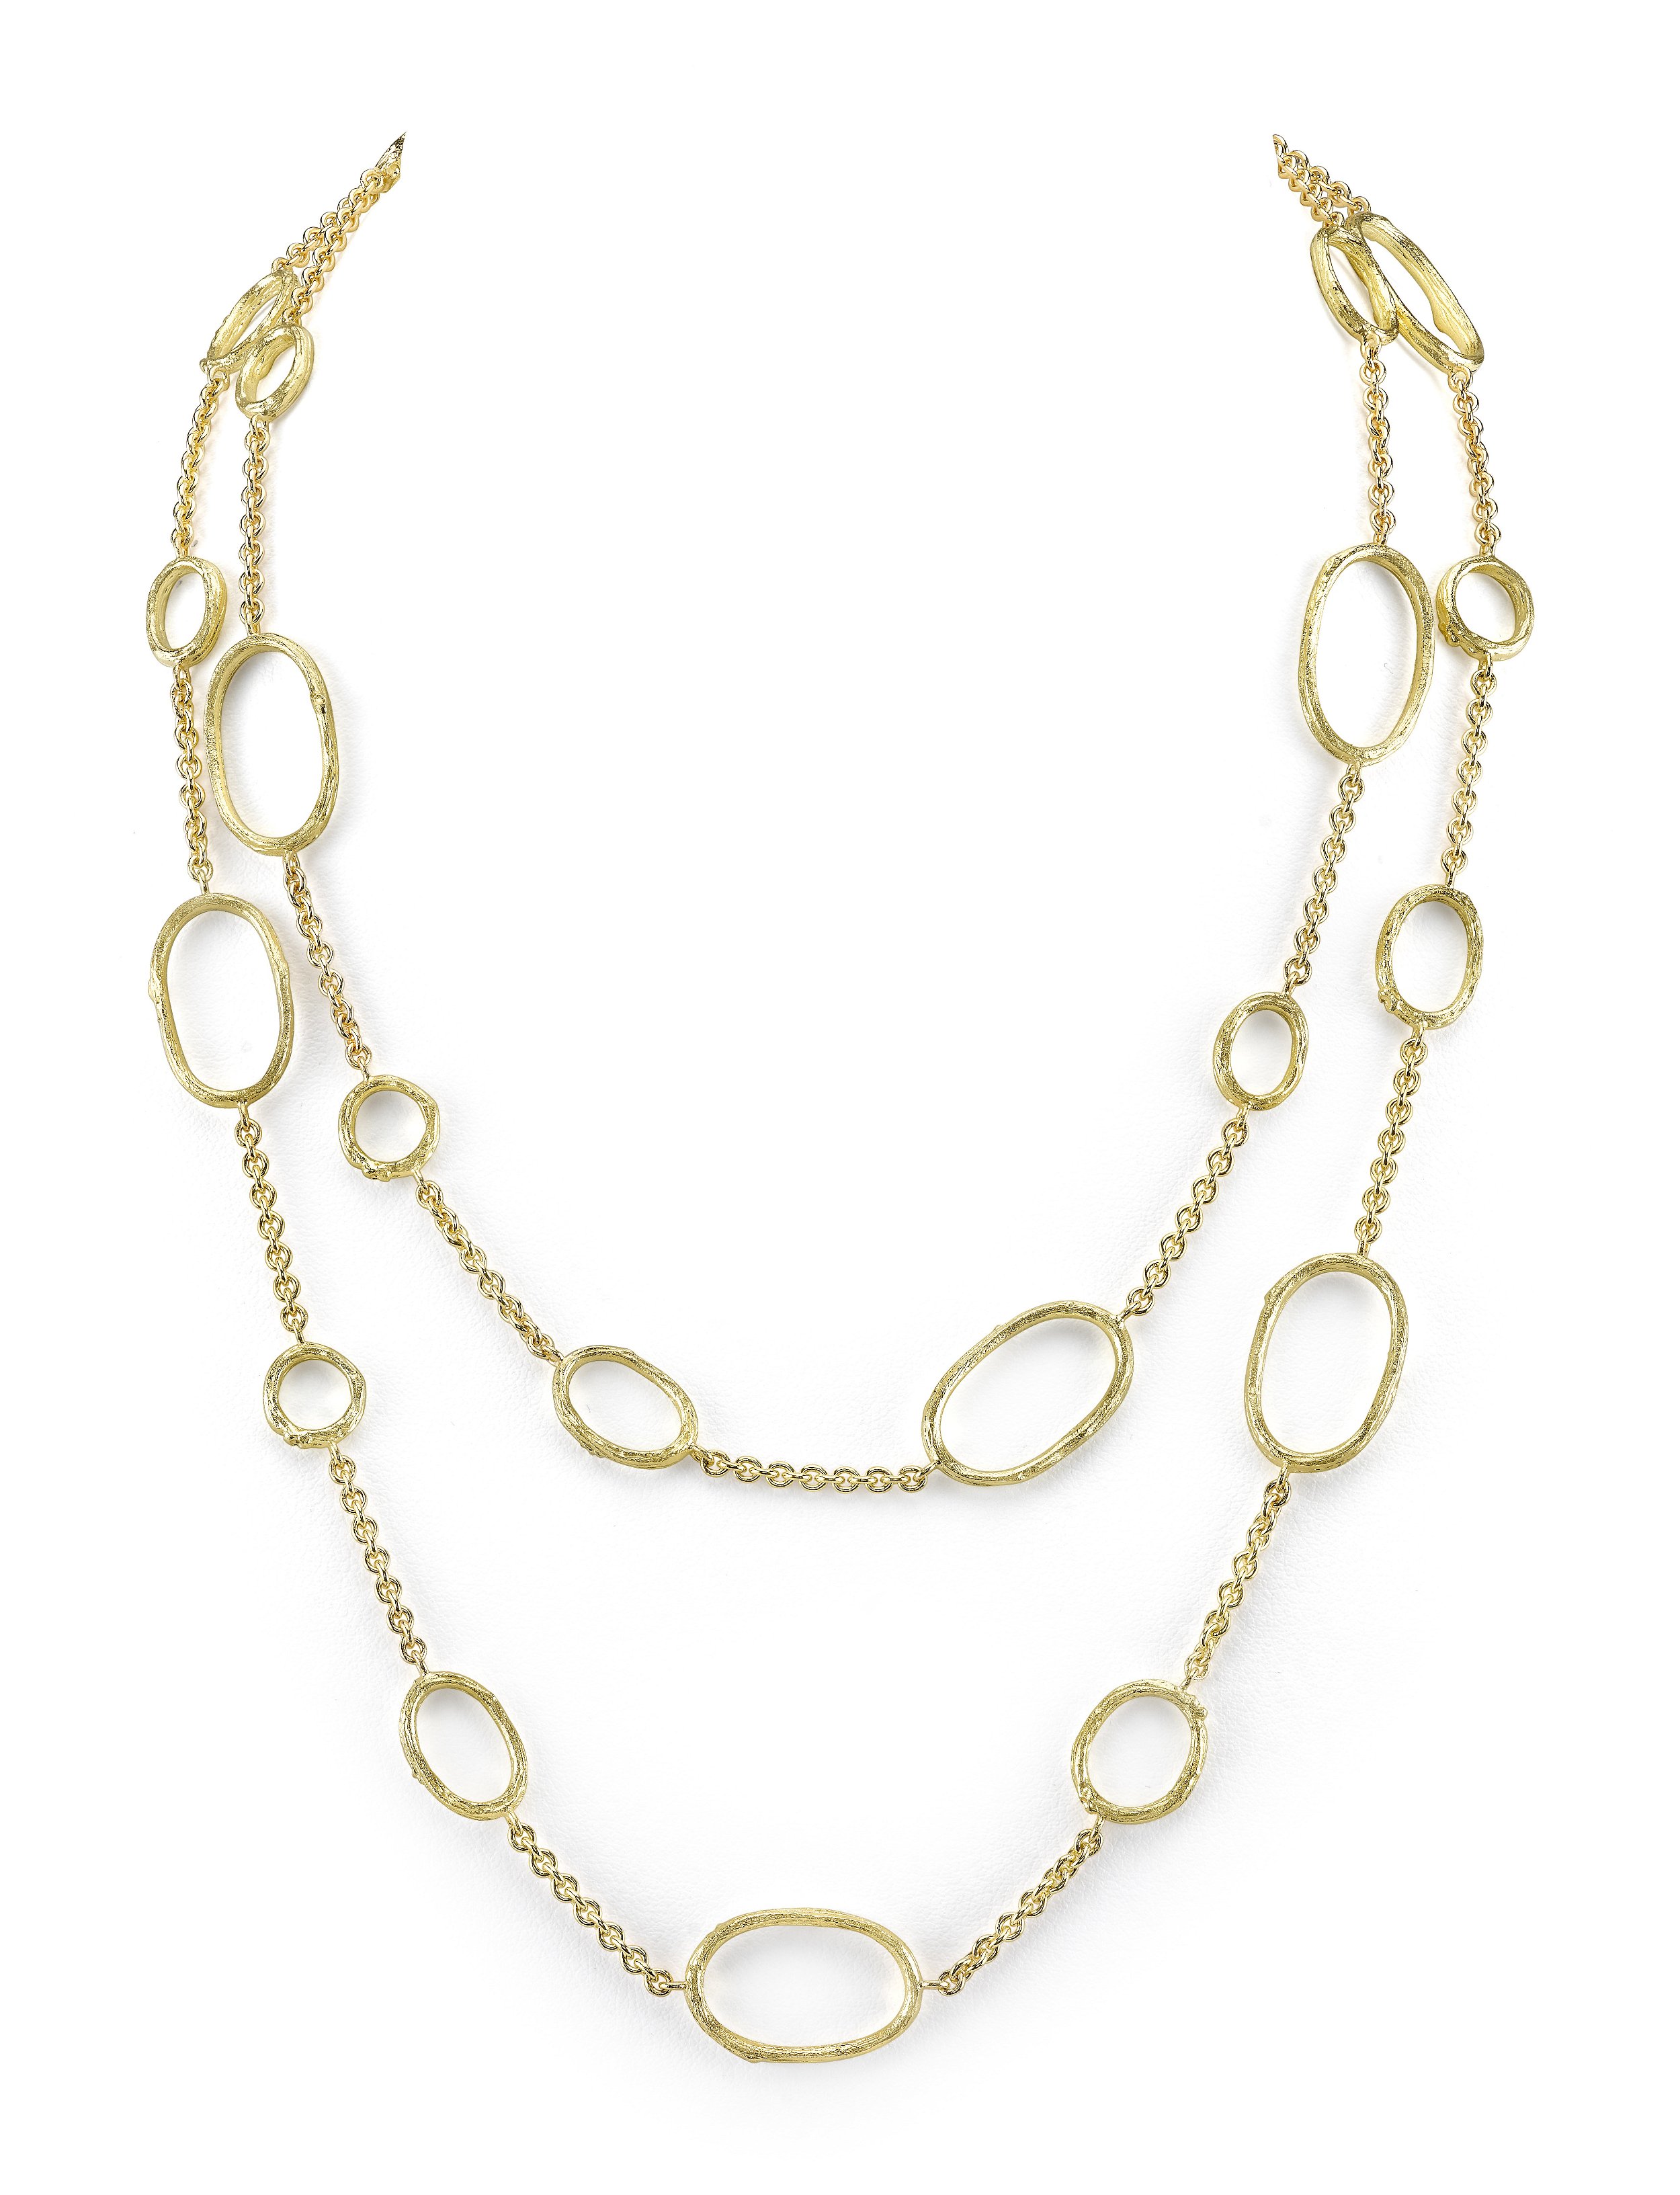 Olive Branch Link and Chain Necklace in 19kt Yellow Gold - 34.5 inches